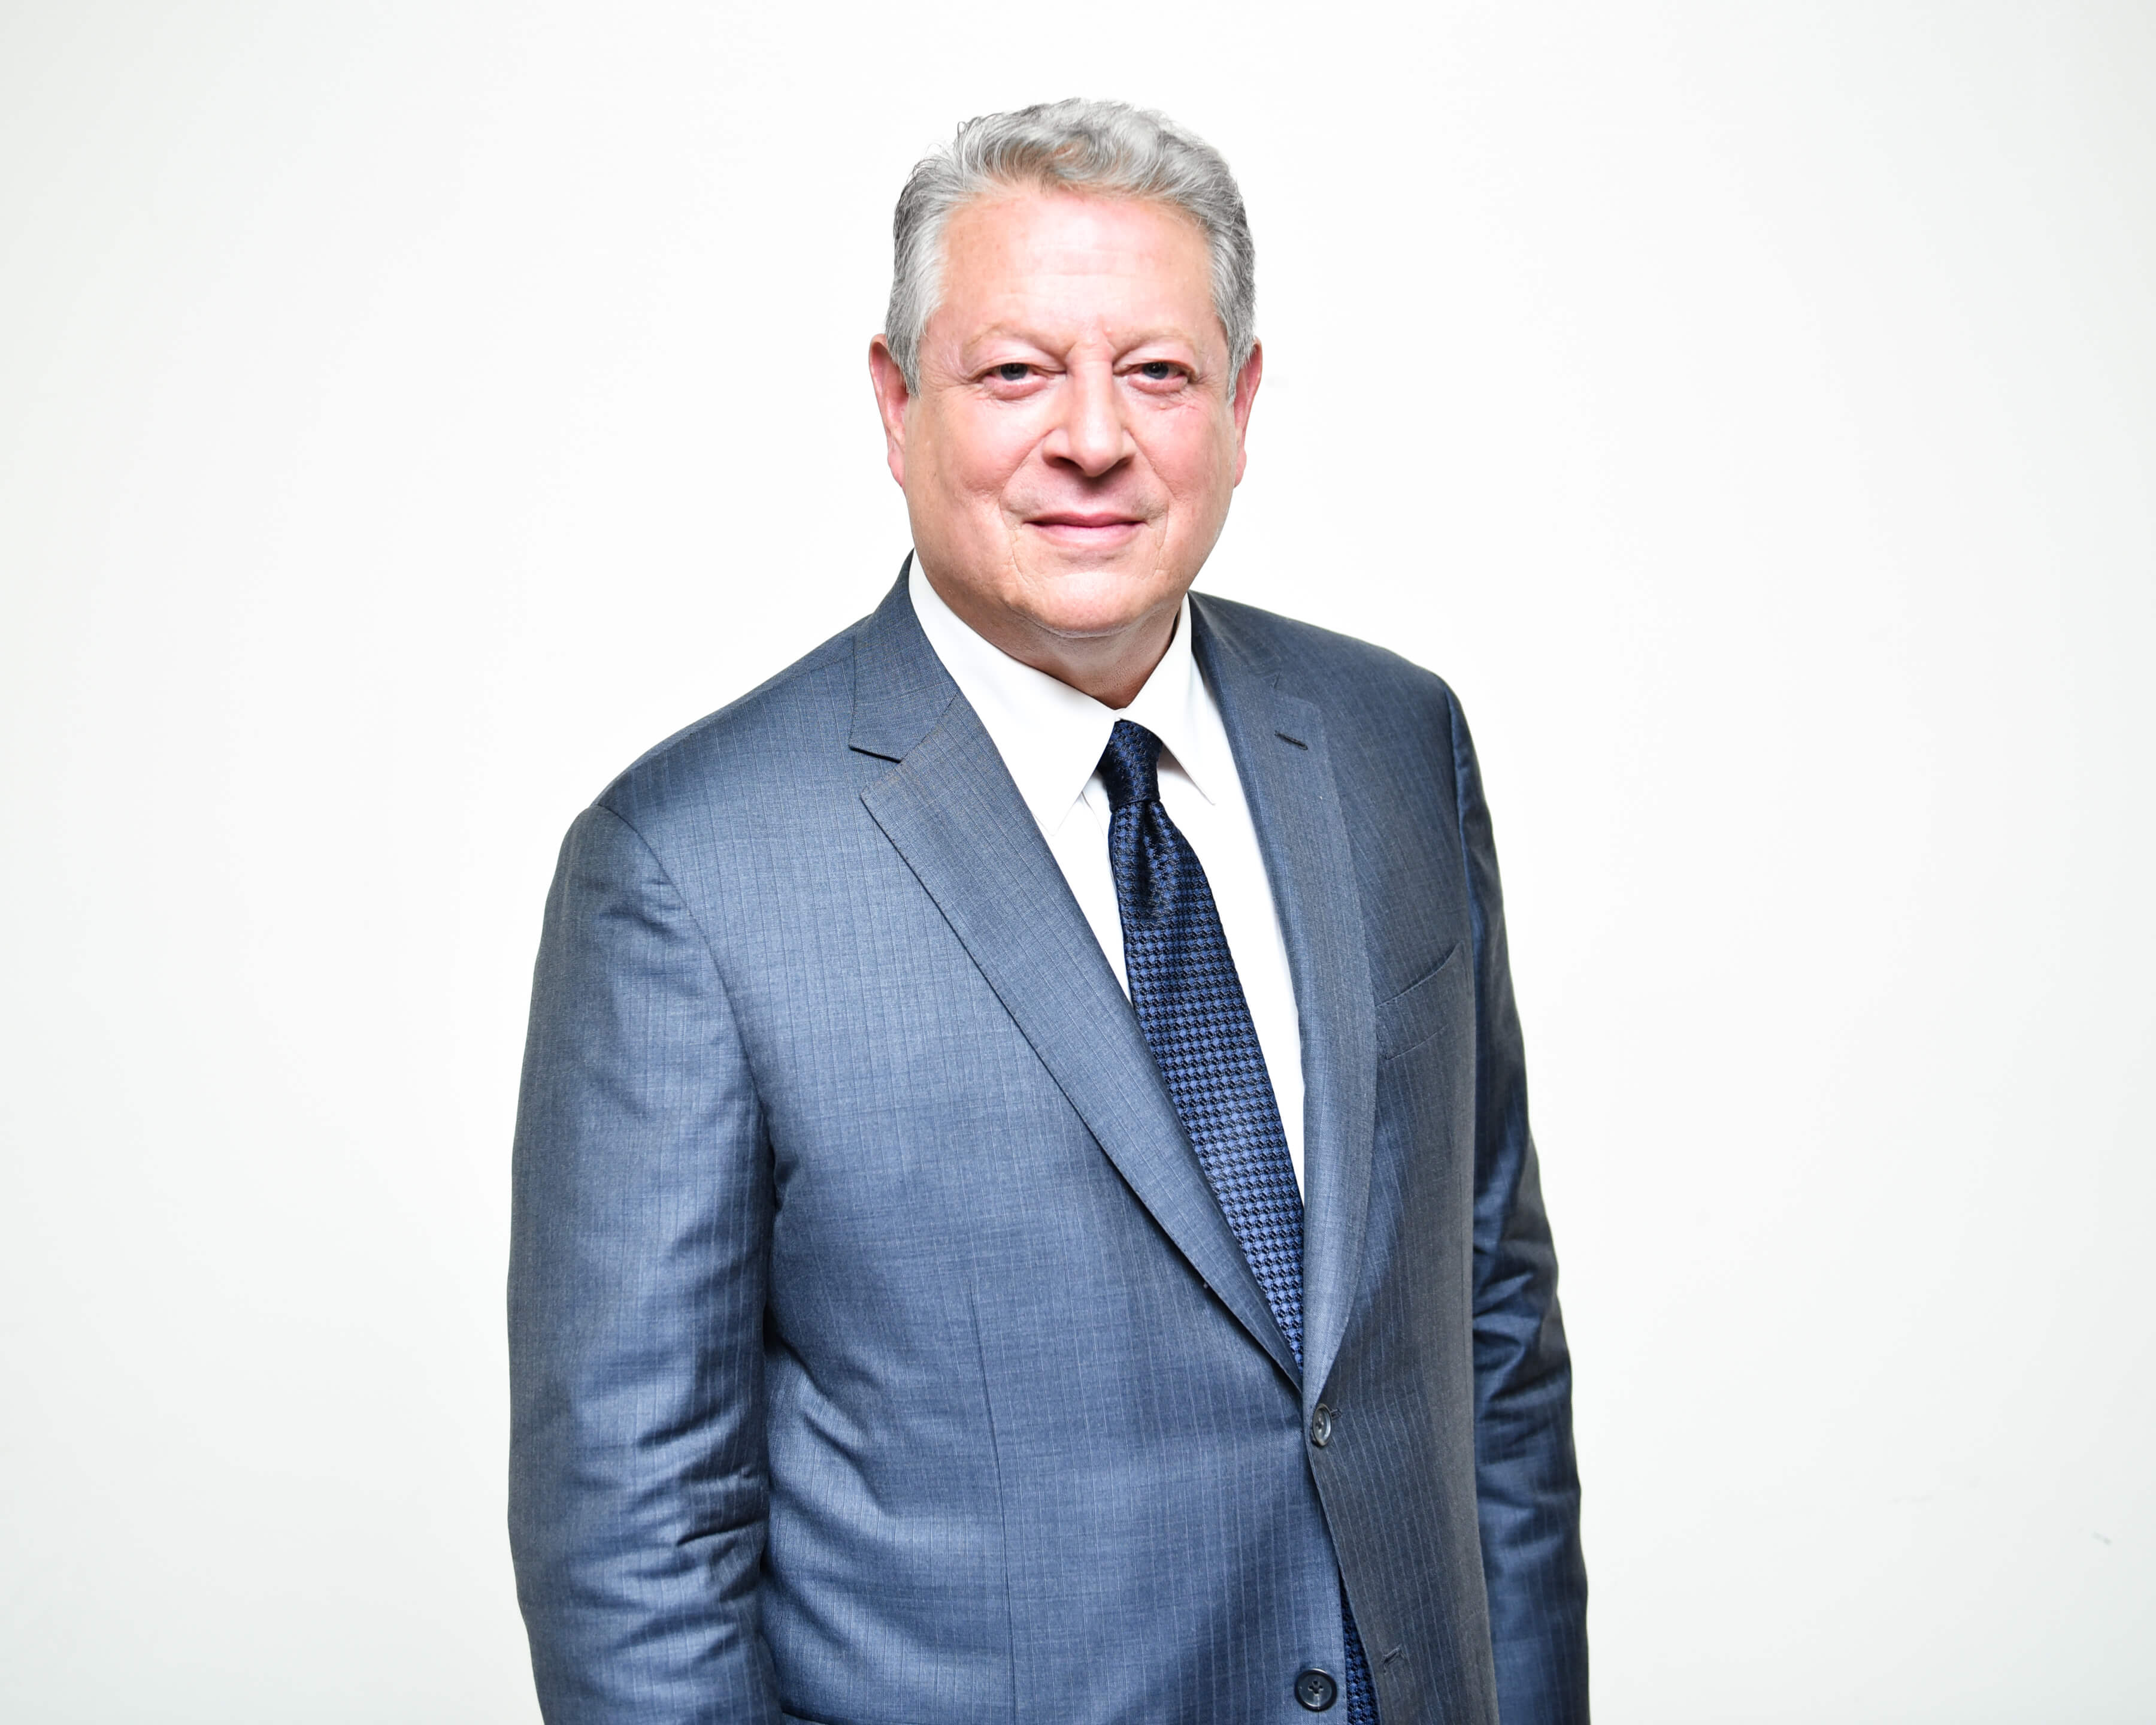 FBN knowledge partner event: Oxford Saïd Executive Education A special broadcast with Al Gore: Leadership in extraordinary times